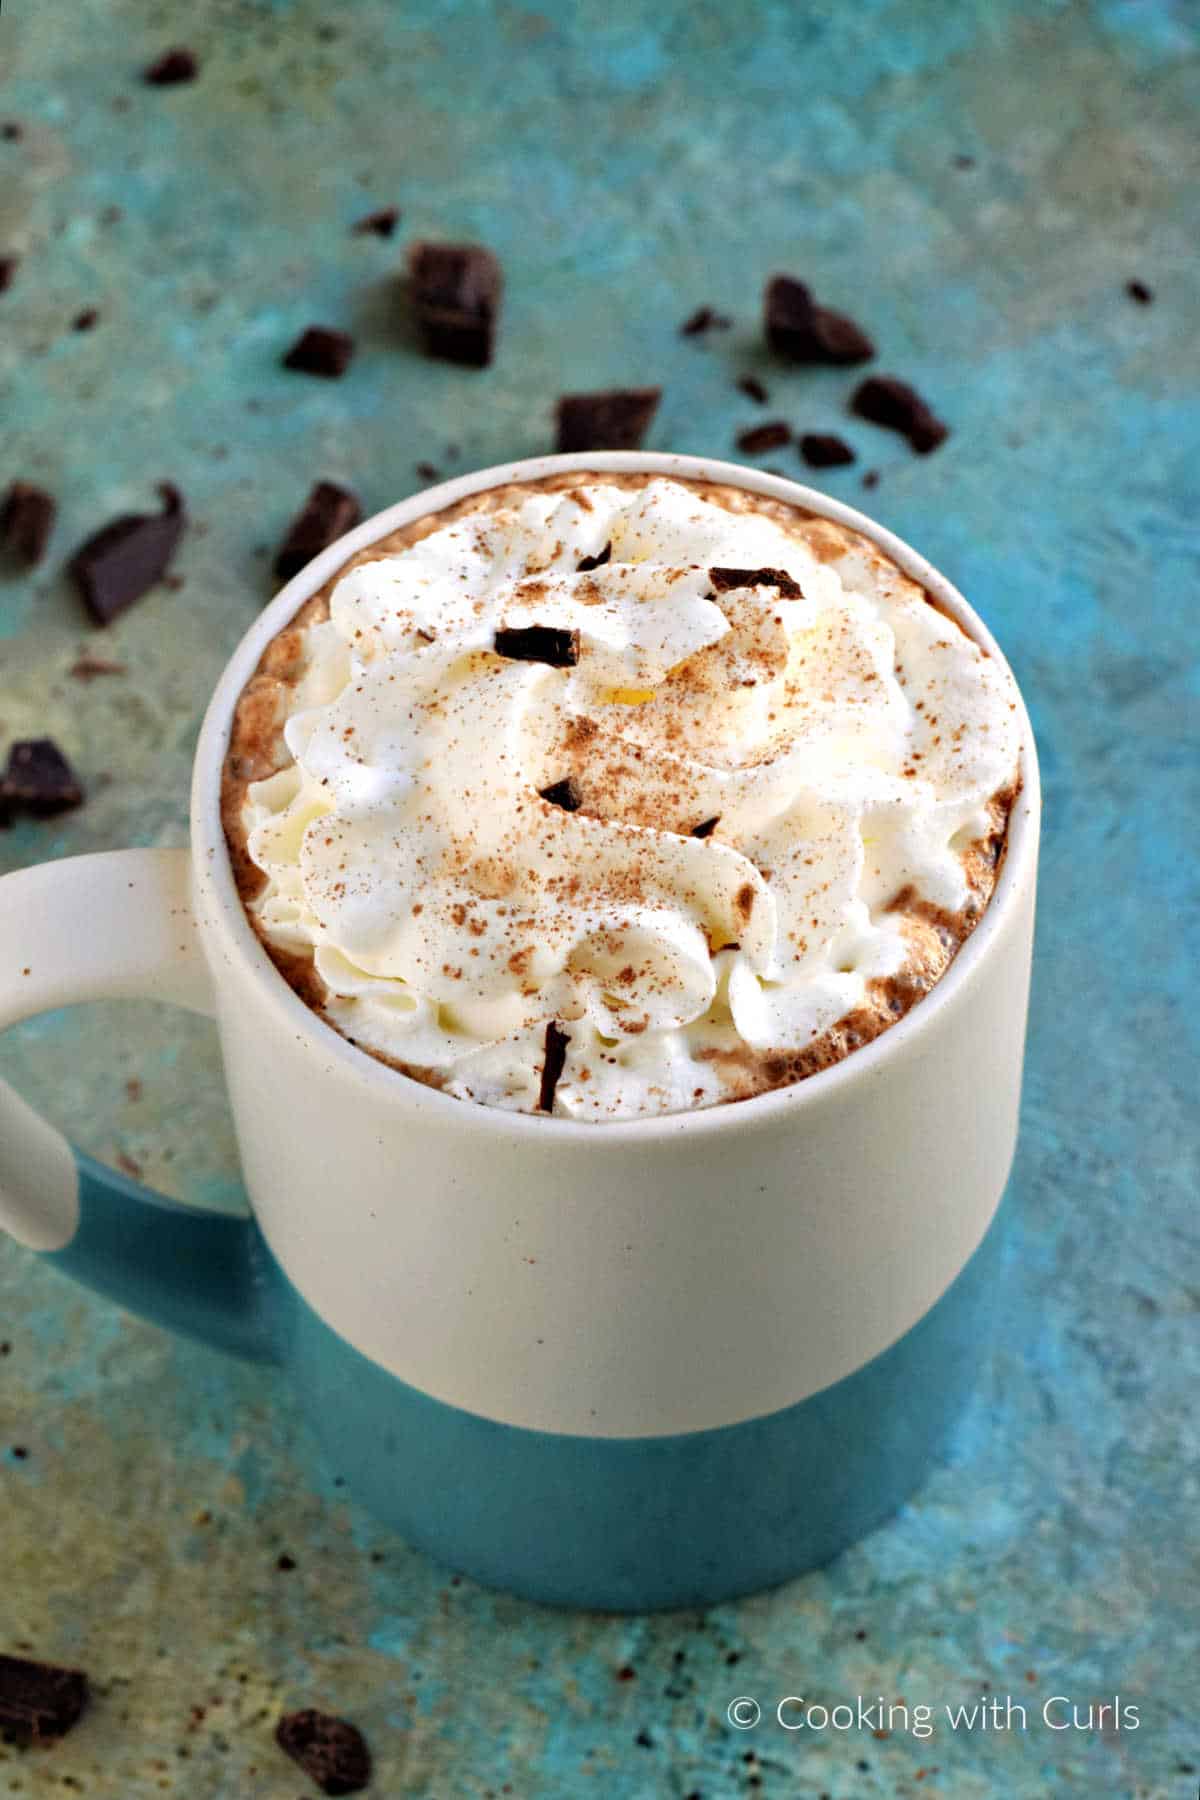 Caffe Mocha topped with whipped cream and chocolate shavings.